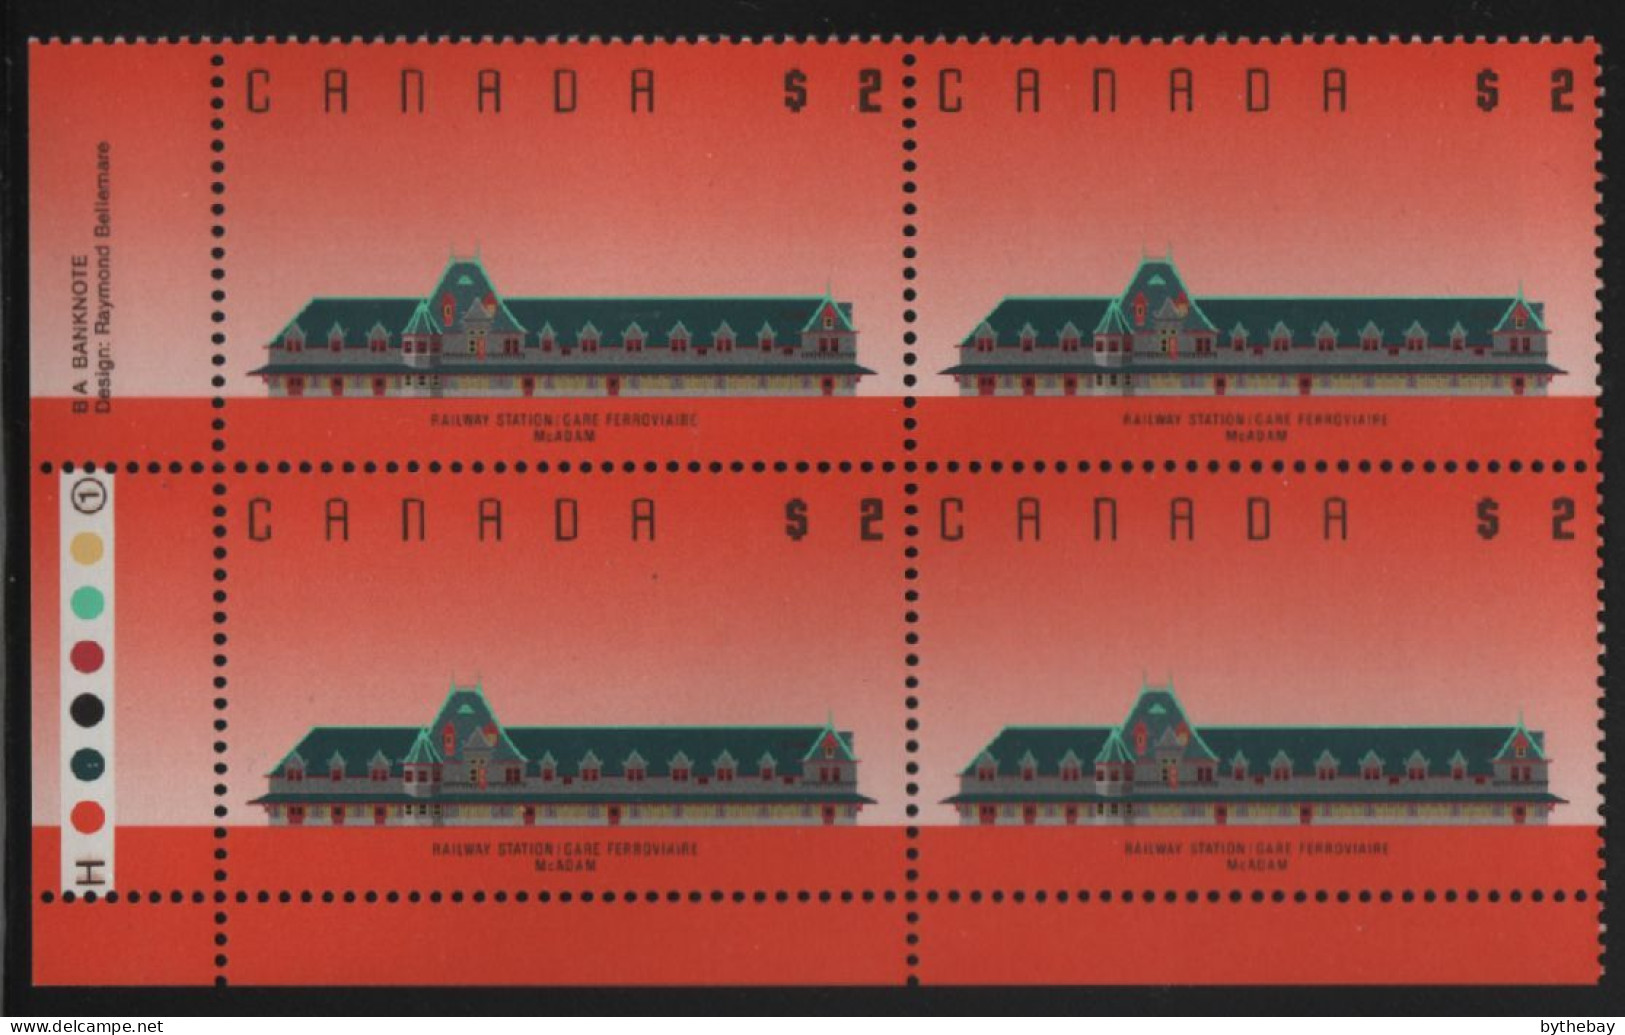 Canada 1988-92 MNH Sc 1182 $2 McAdam Railway Station LL Plate Block - Num. Planches & Inscriptions Marge